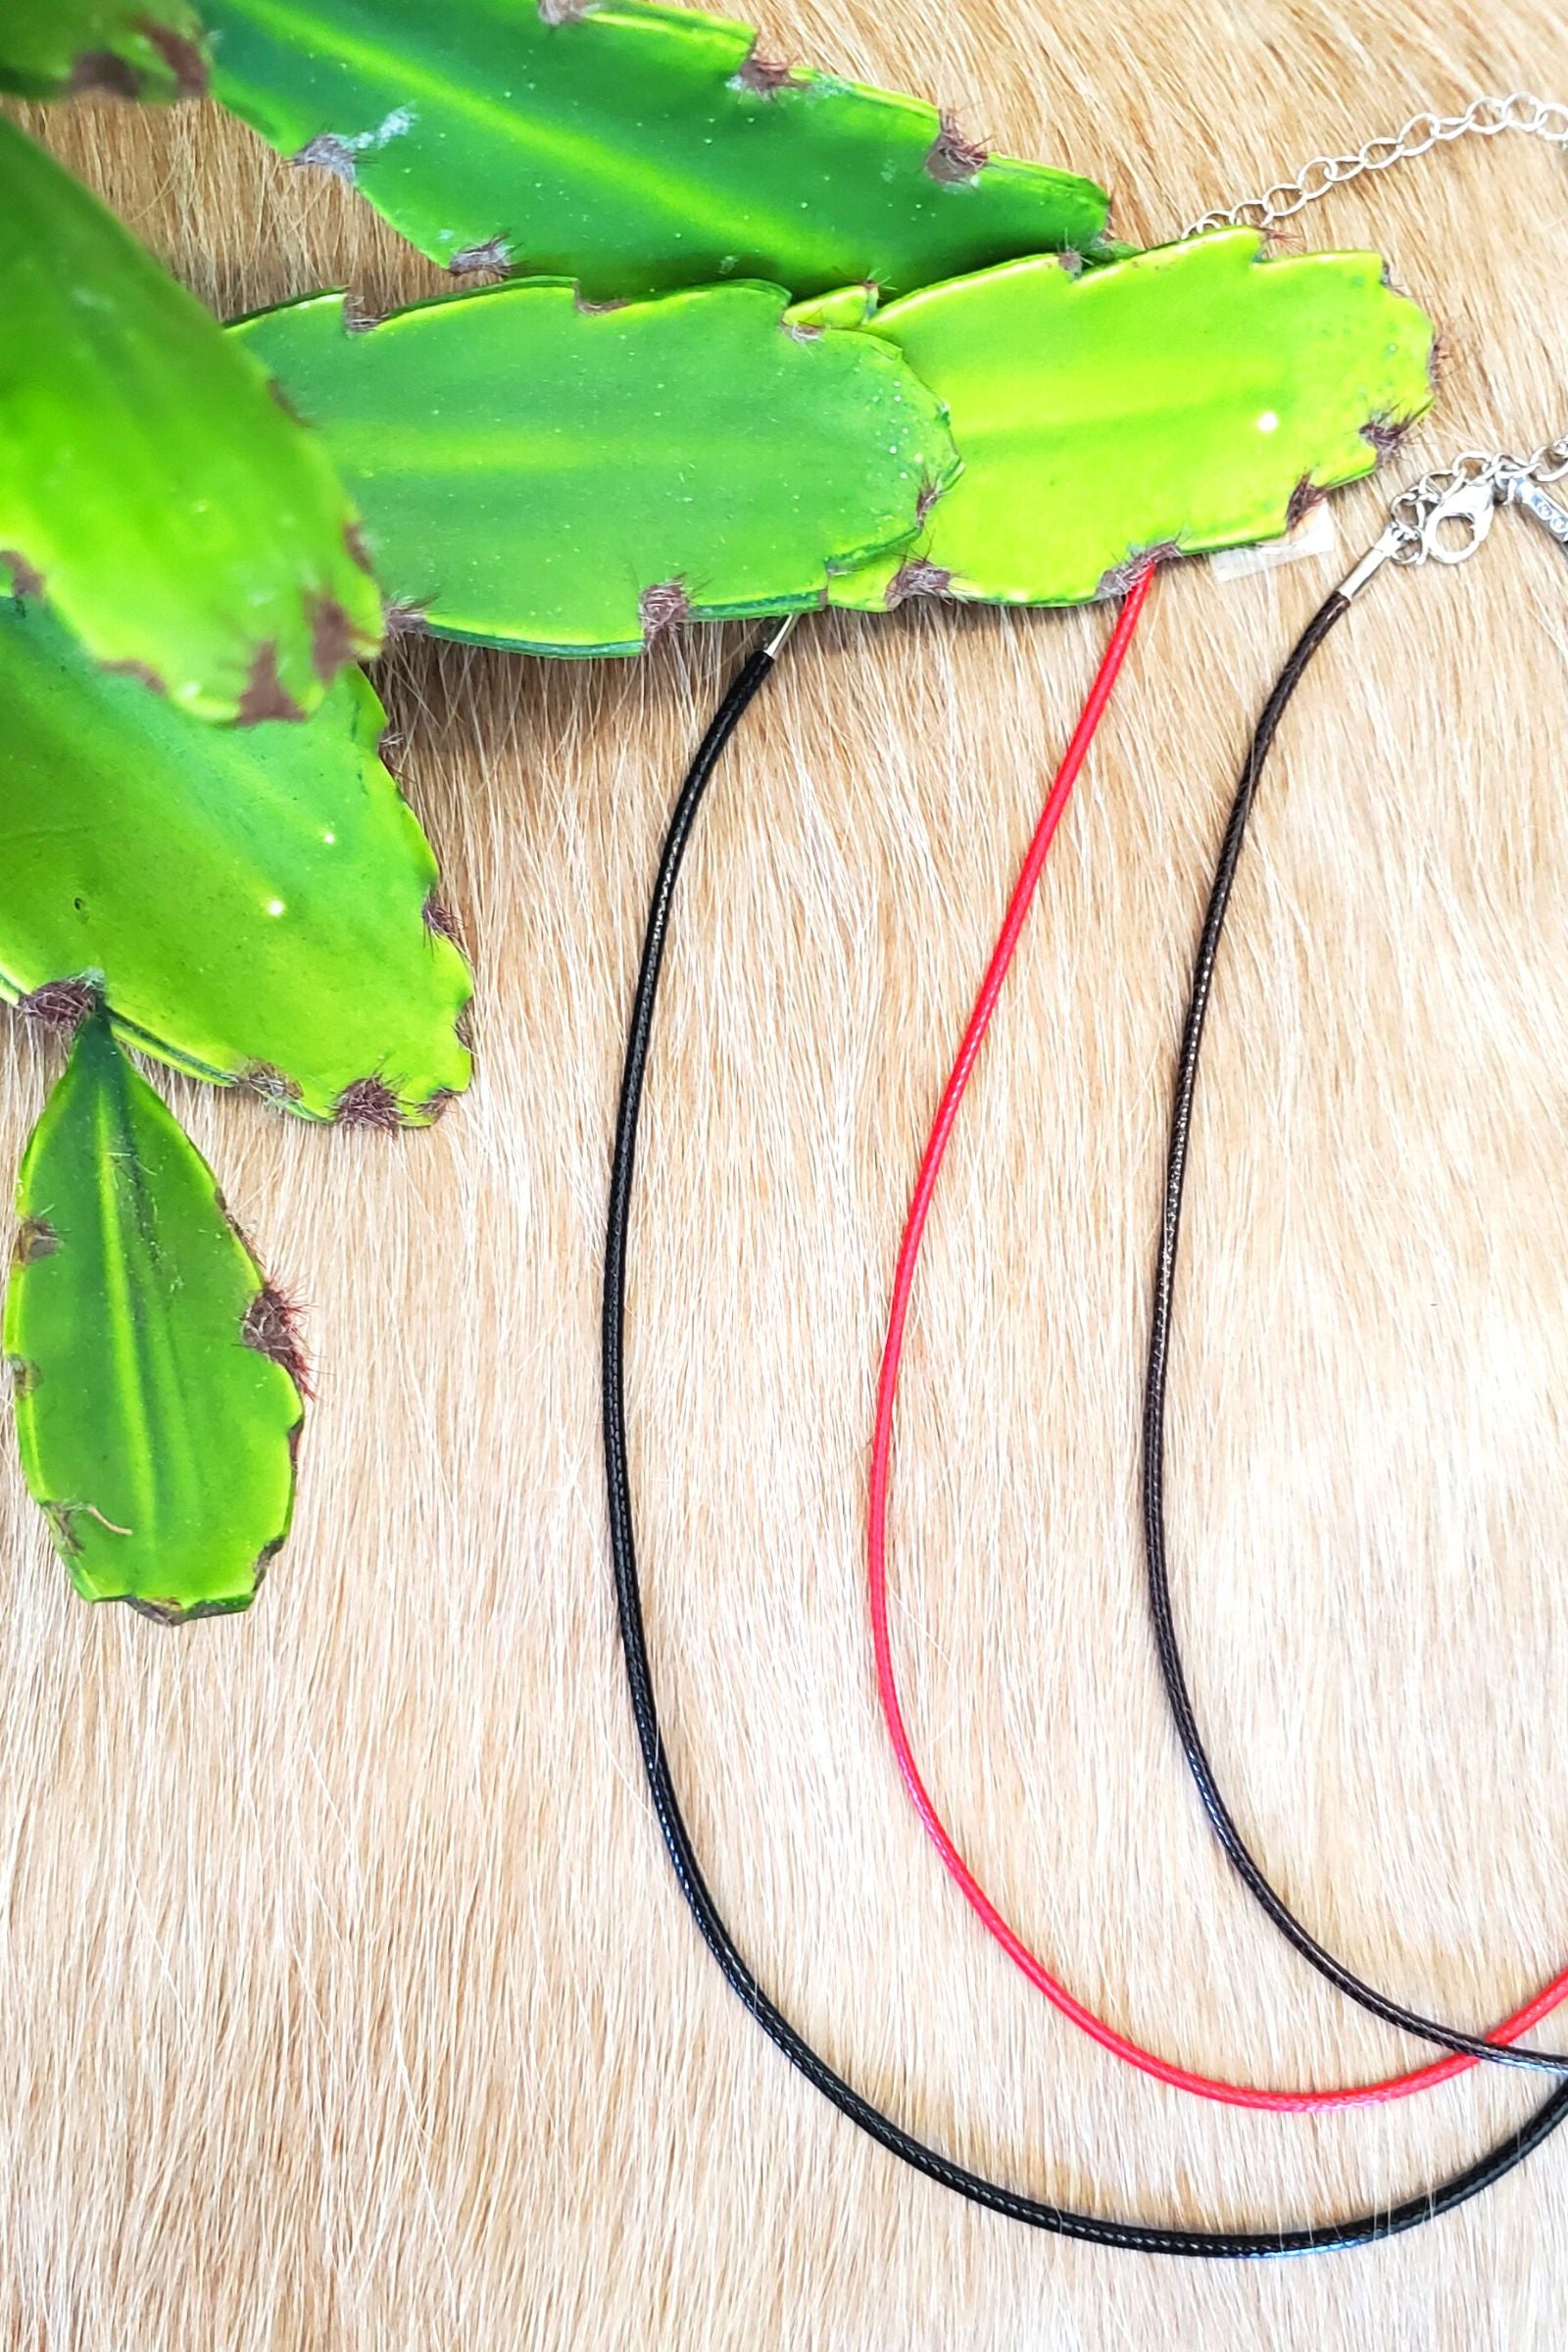 Red Cord Necklace